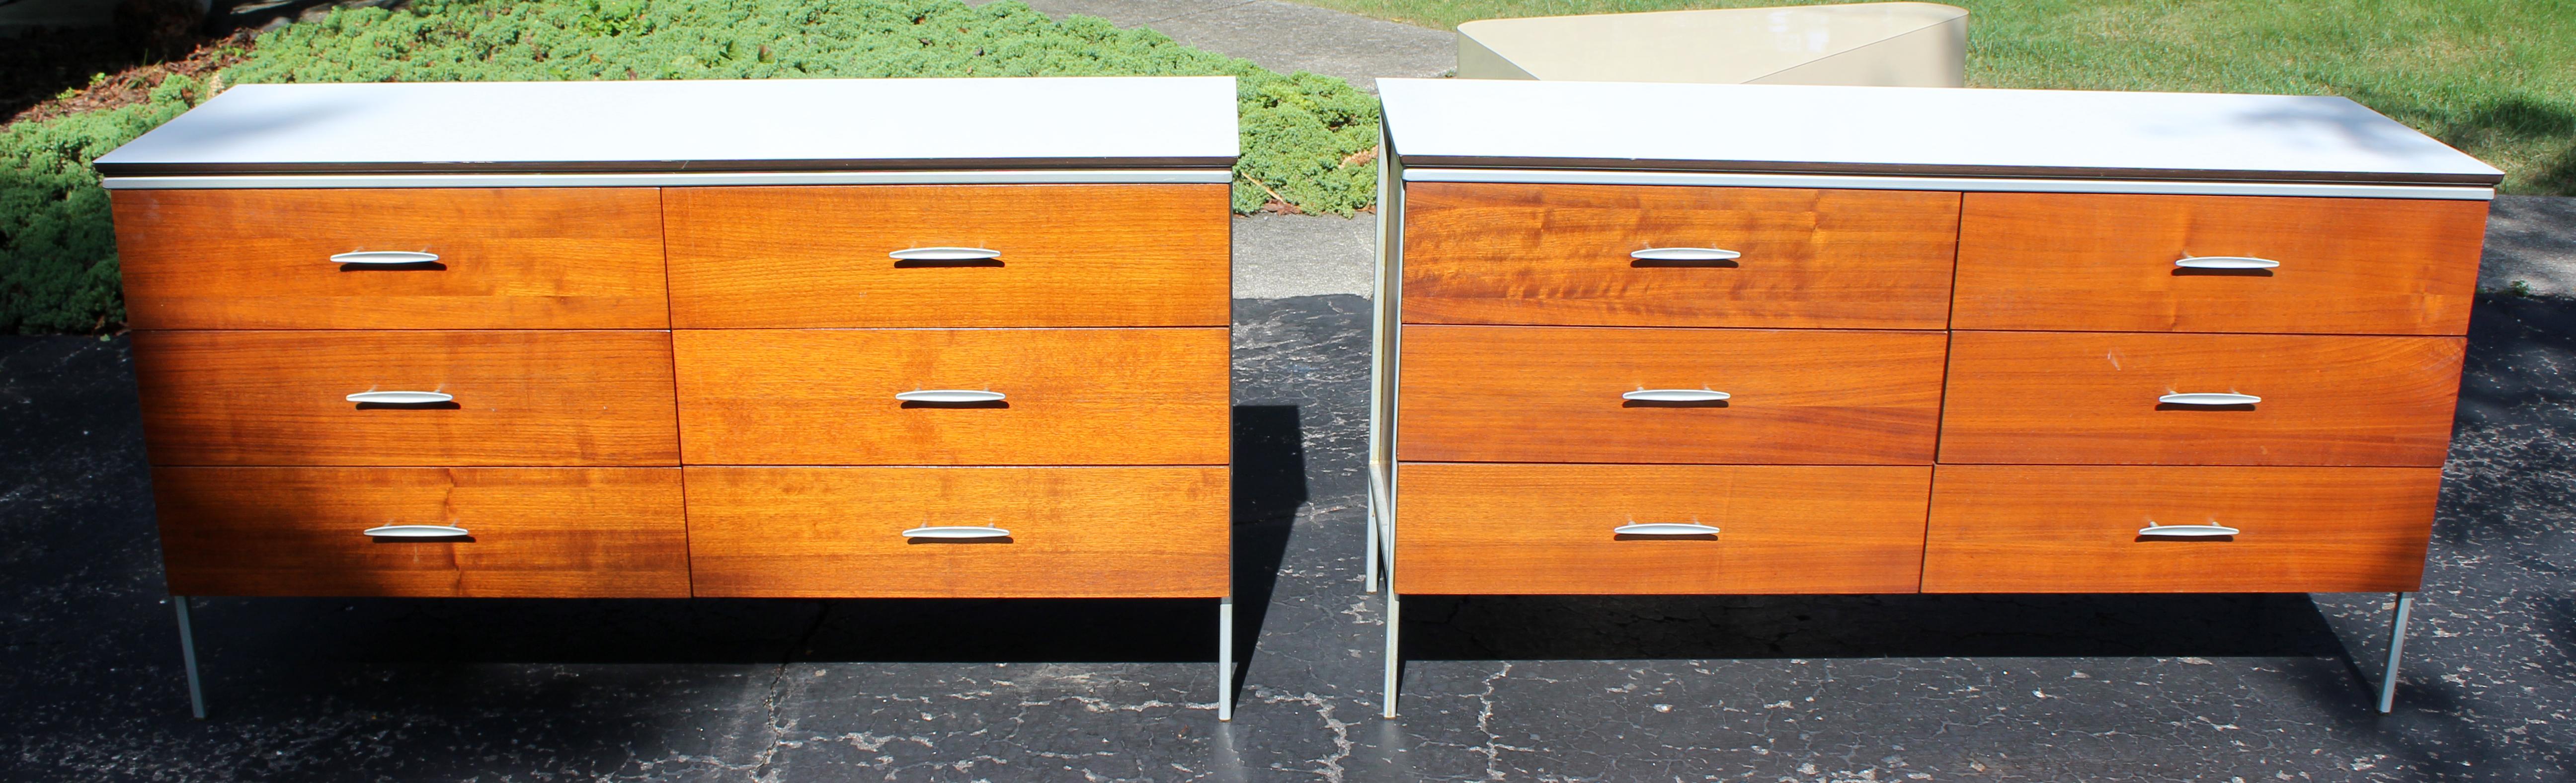 For your consideration is a wonderful pair of wood dressers, with formica tops and six drawers each, by Vista, in the style of Knoll and Paul McCobb, circa 1960s. In very good condition. The dimensions are 54